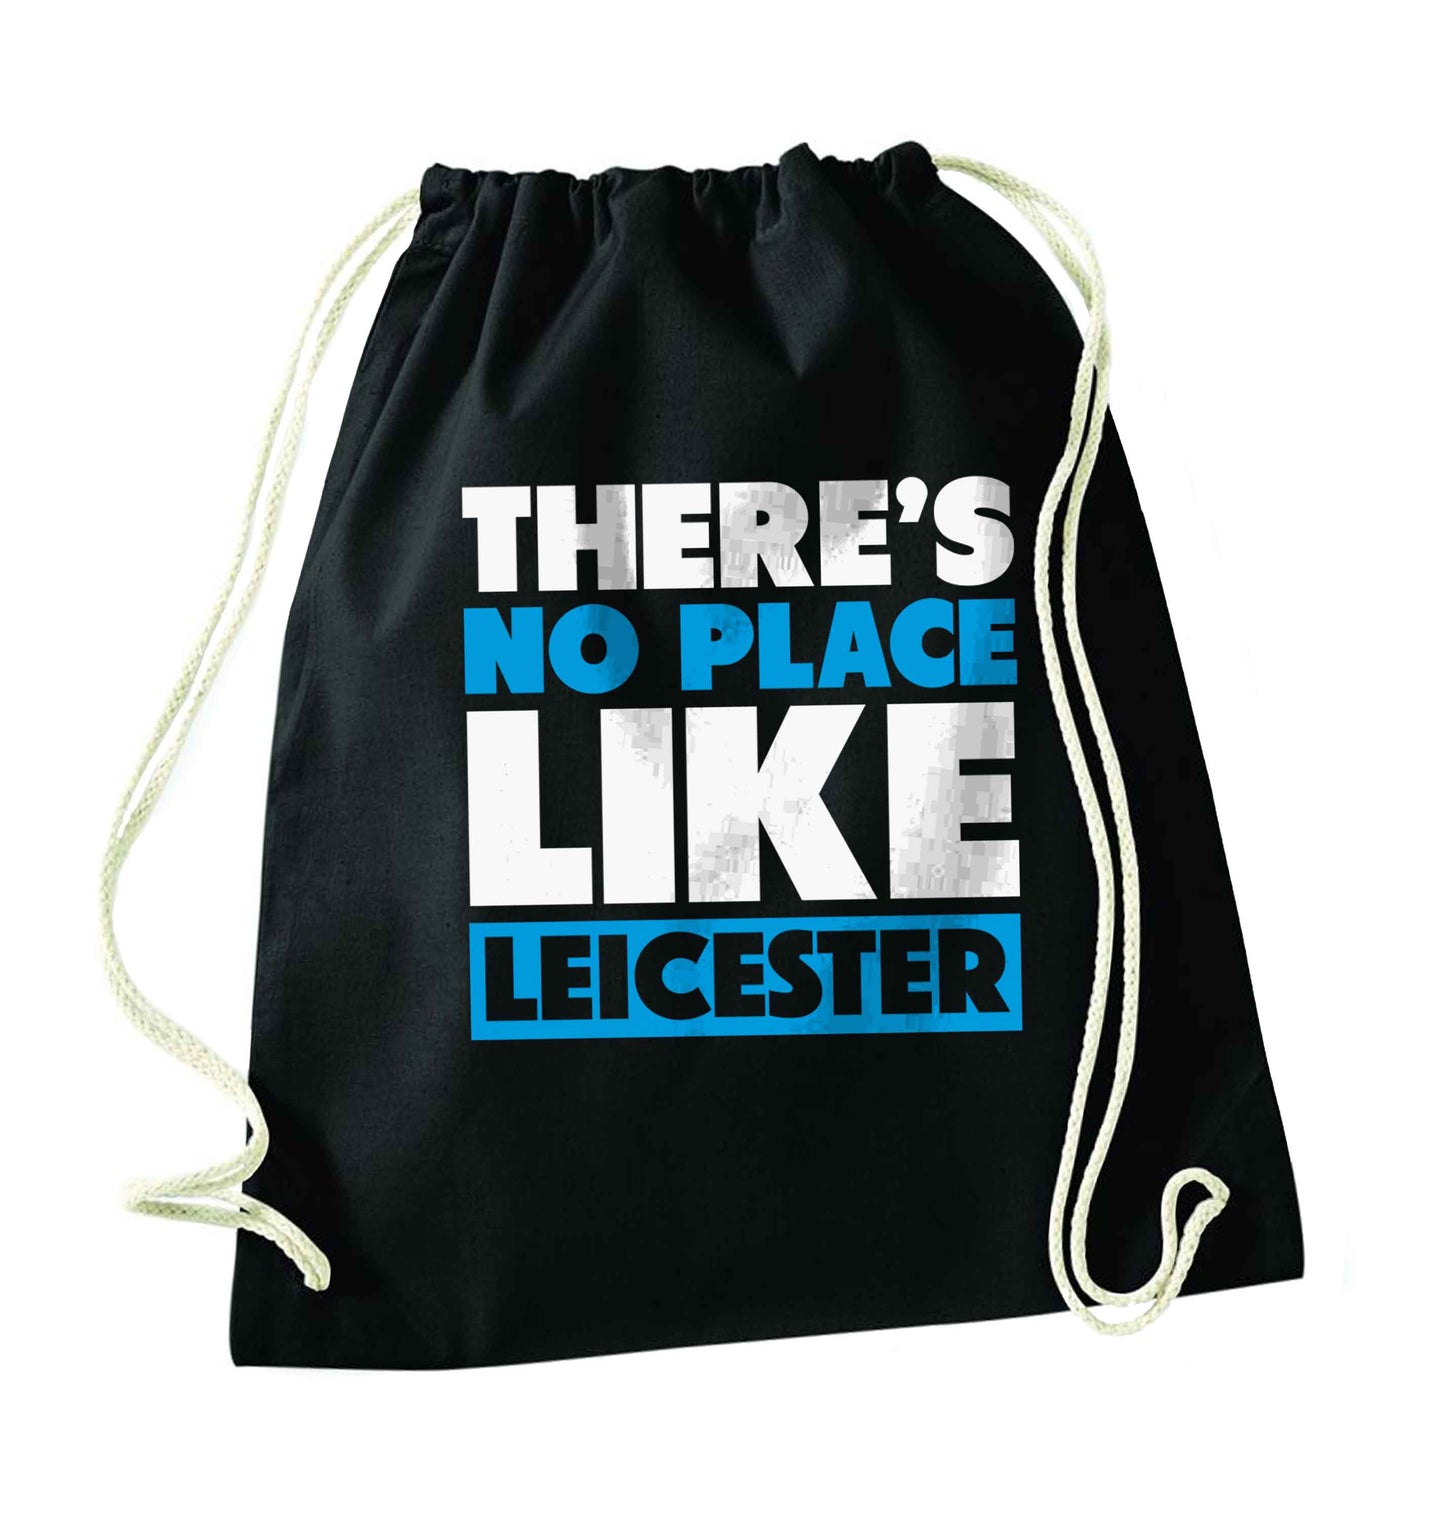 There's no place like Leicester black drawstring bag